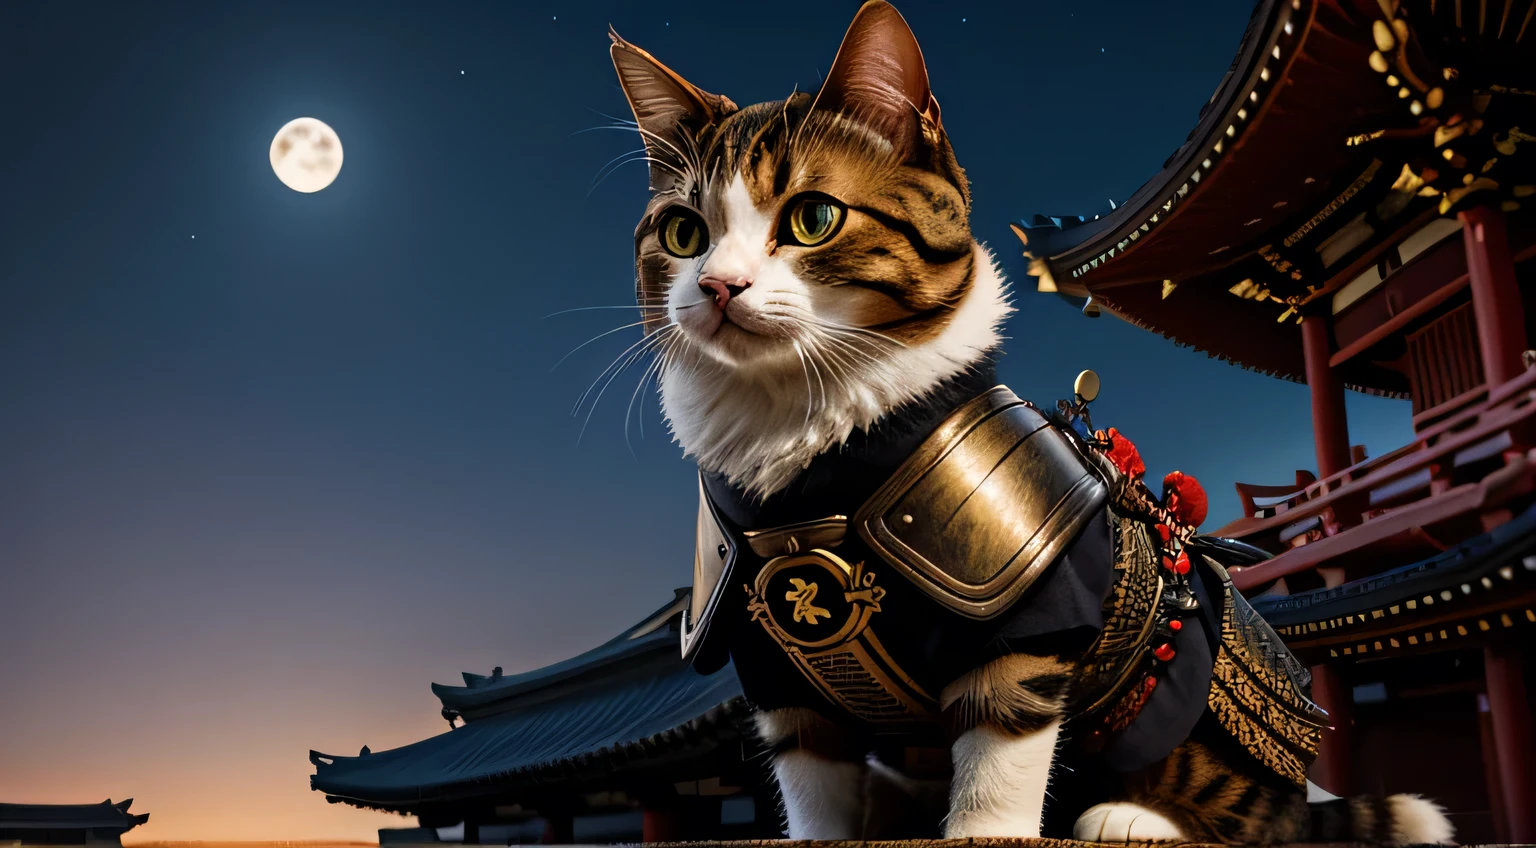 Anthropomorphic Cat in full samurai armour, photorealistic, standing in front of a temple, in the moonlight, view from below looking up